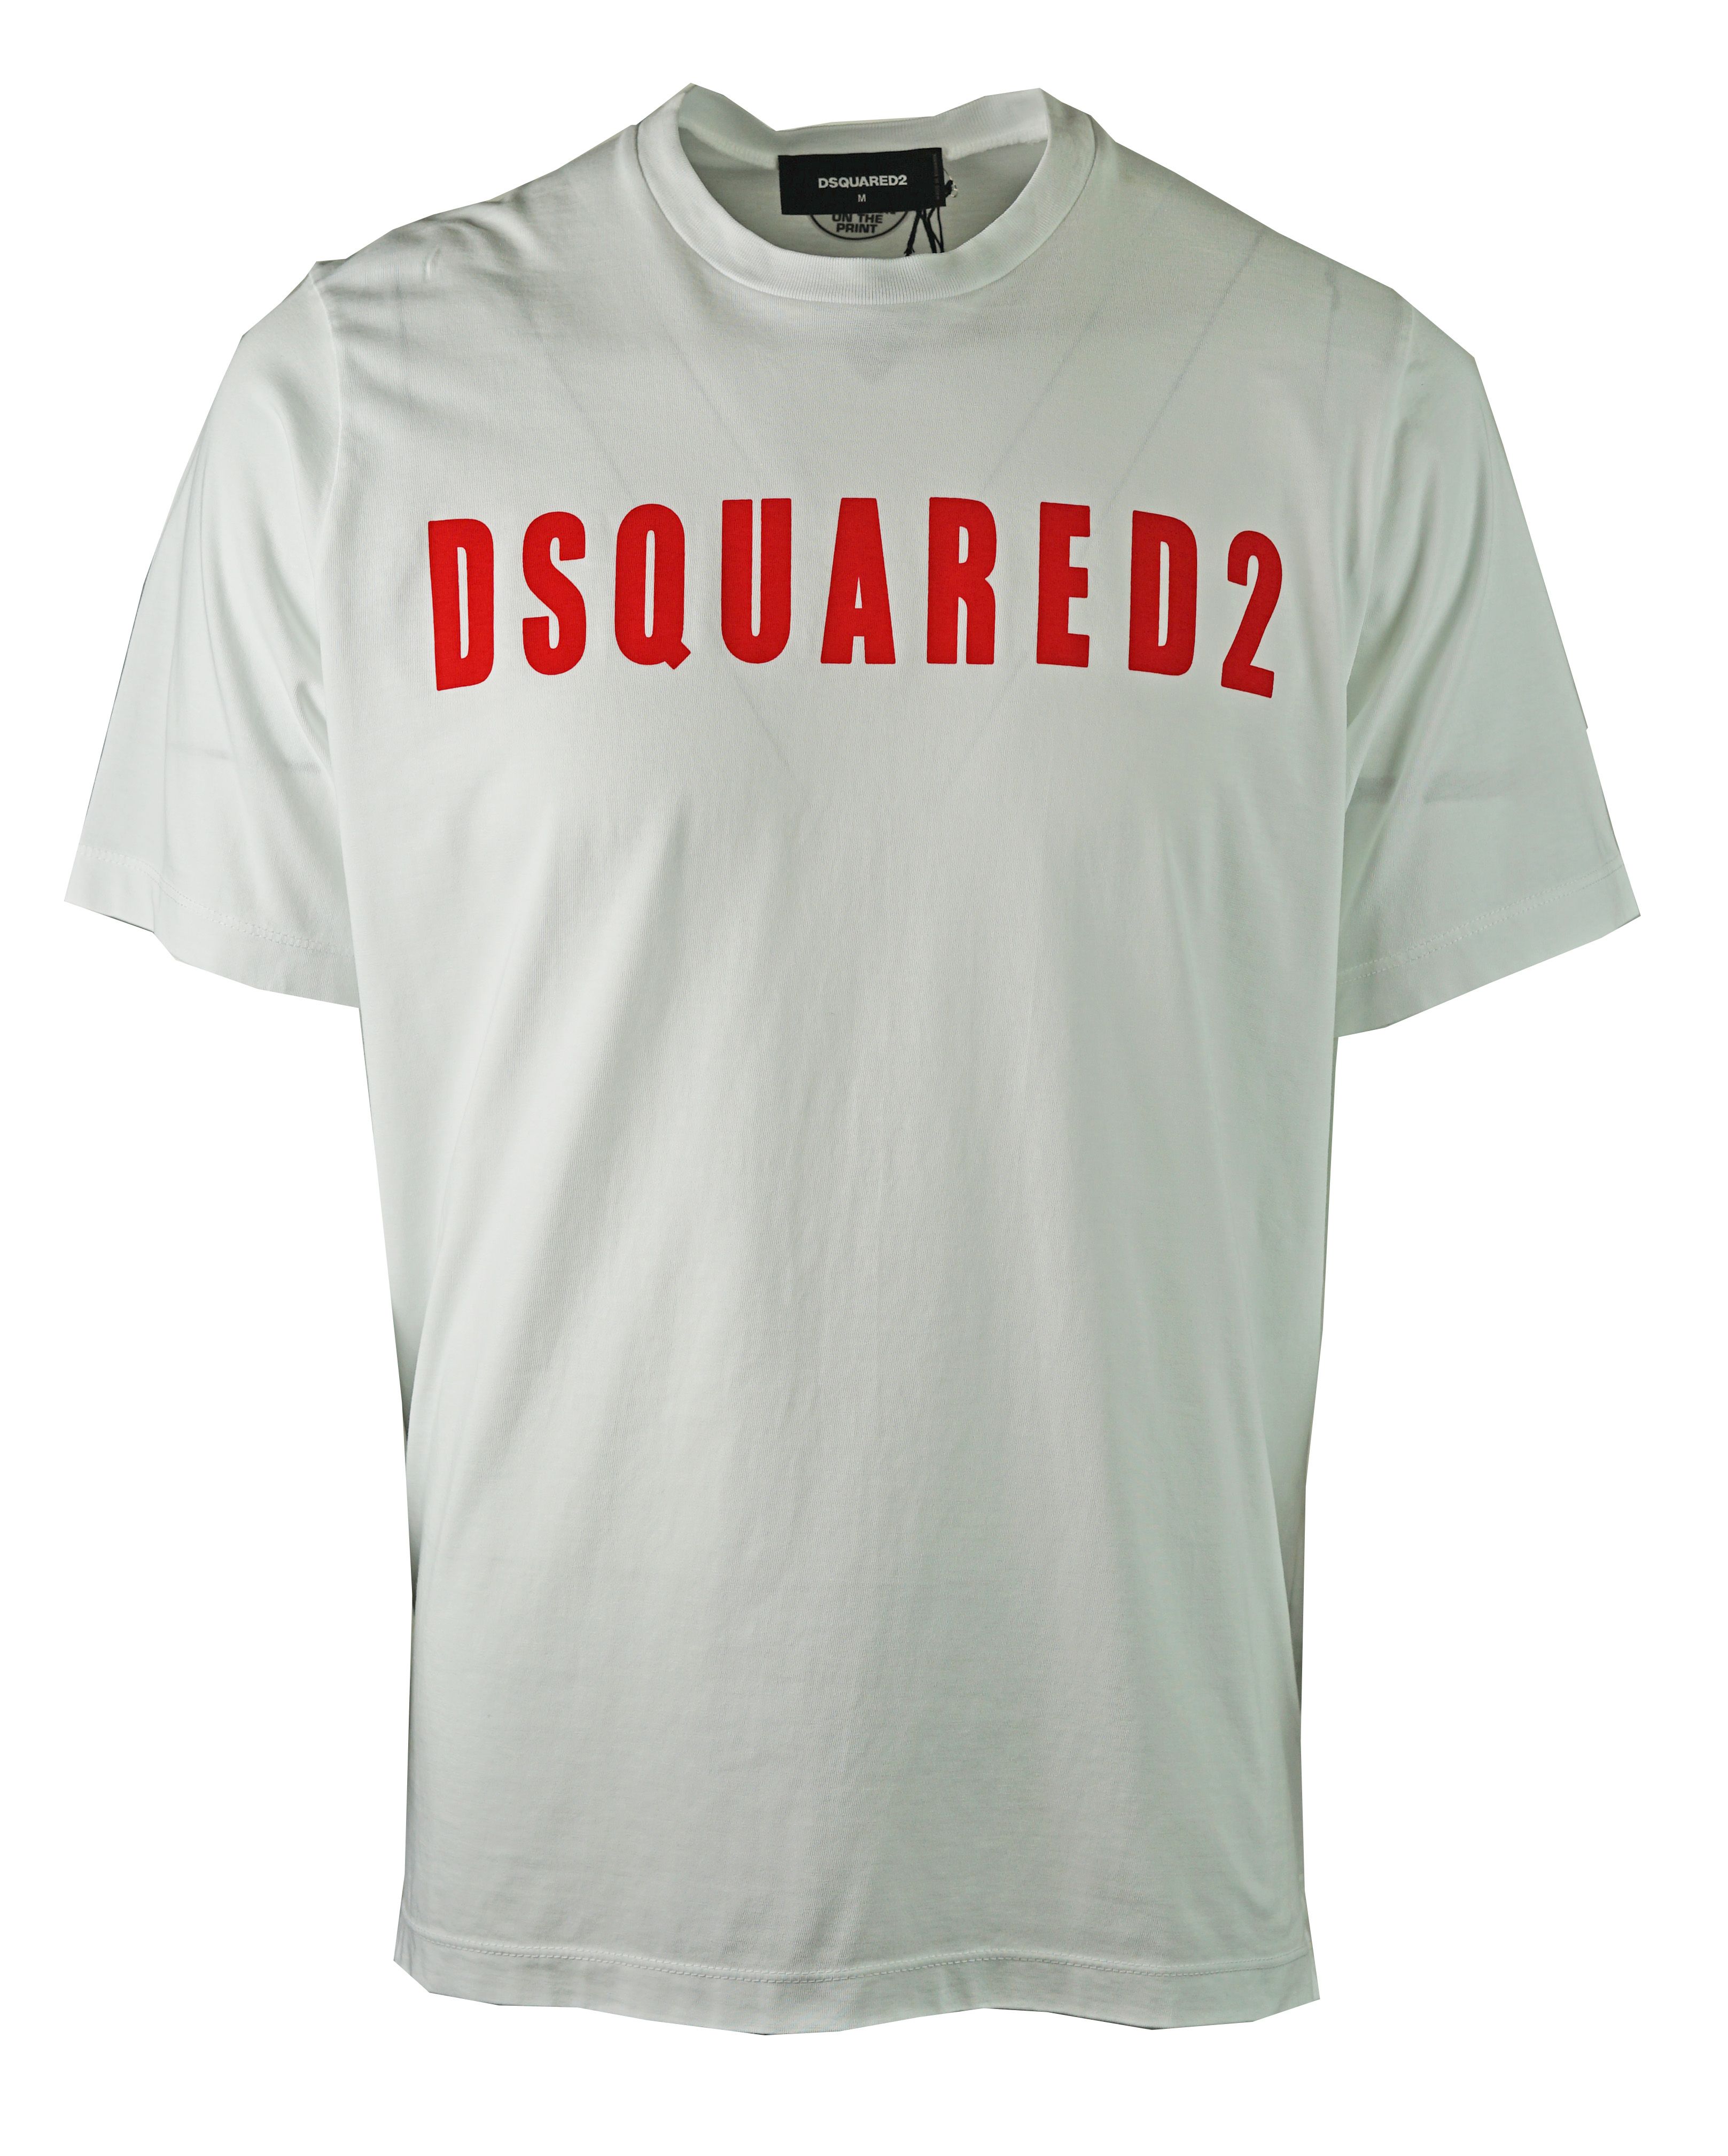 DSquared2 S74GD0472 S20694 100 T-Shirt. Round Crew Neck Tee. 100% Cotton. Short Sleeves. Large Branded Print On The Front. Ribbed Neck and Sleeve Endings